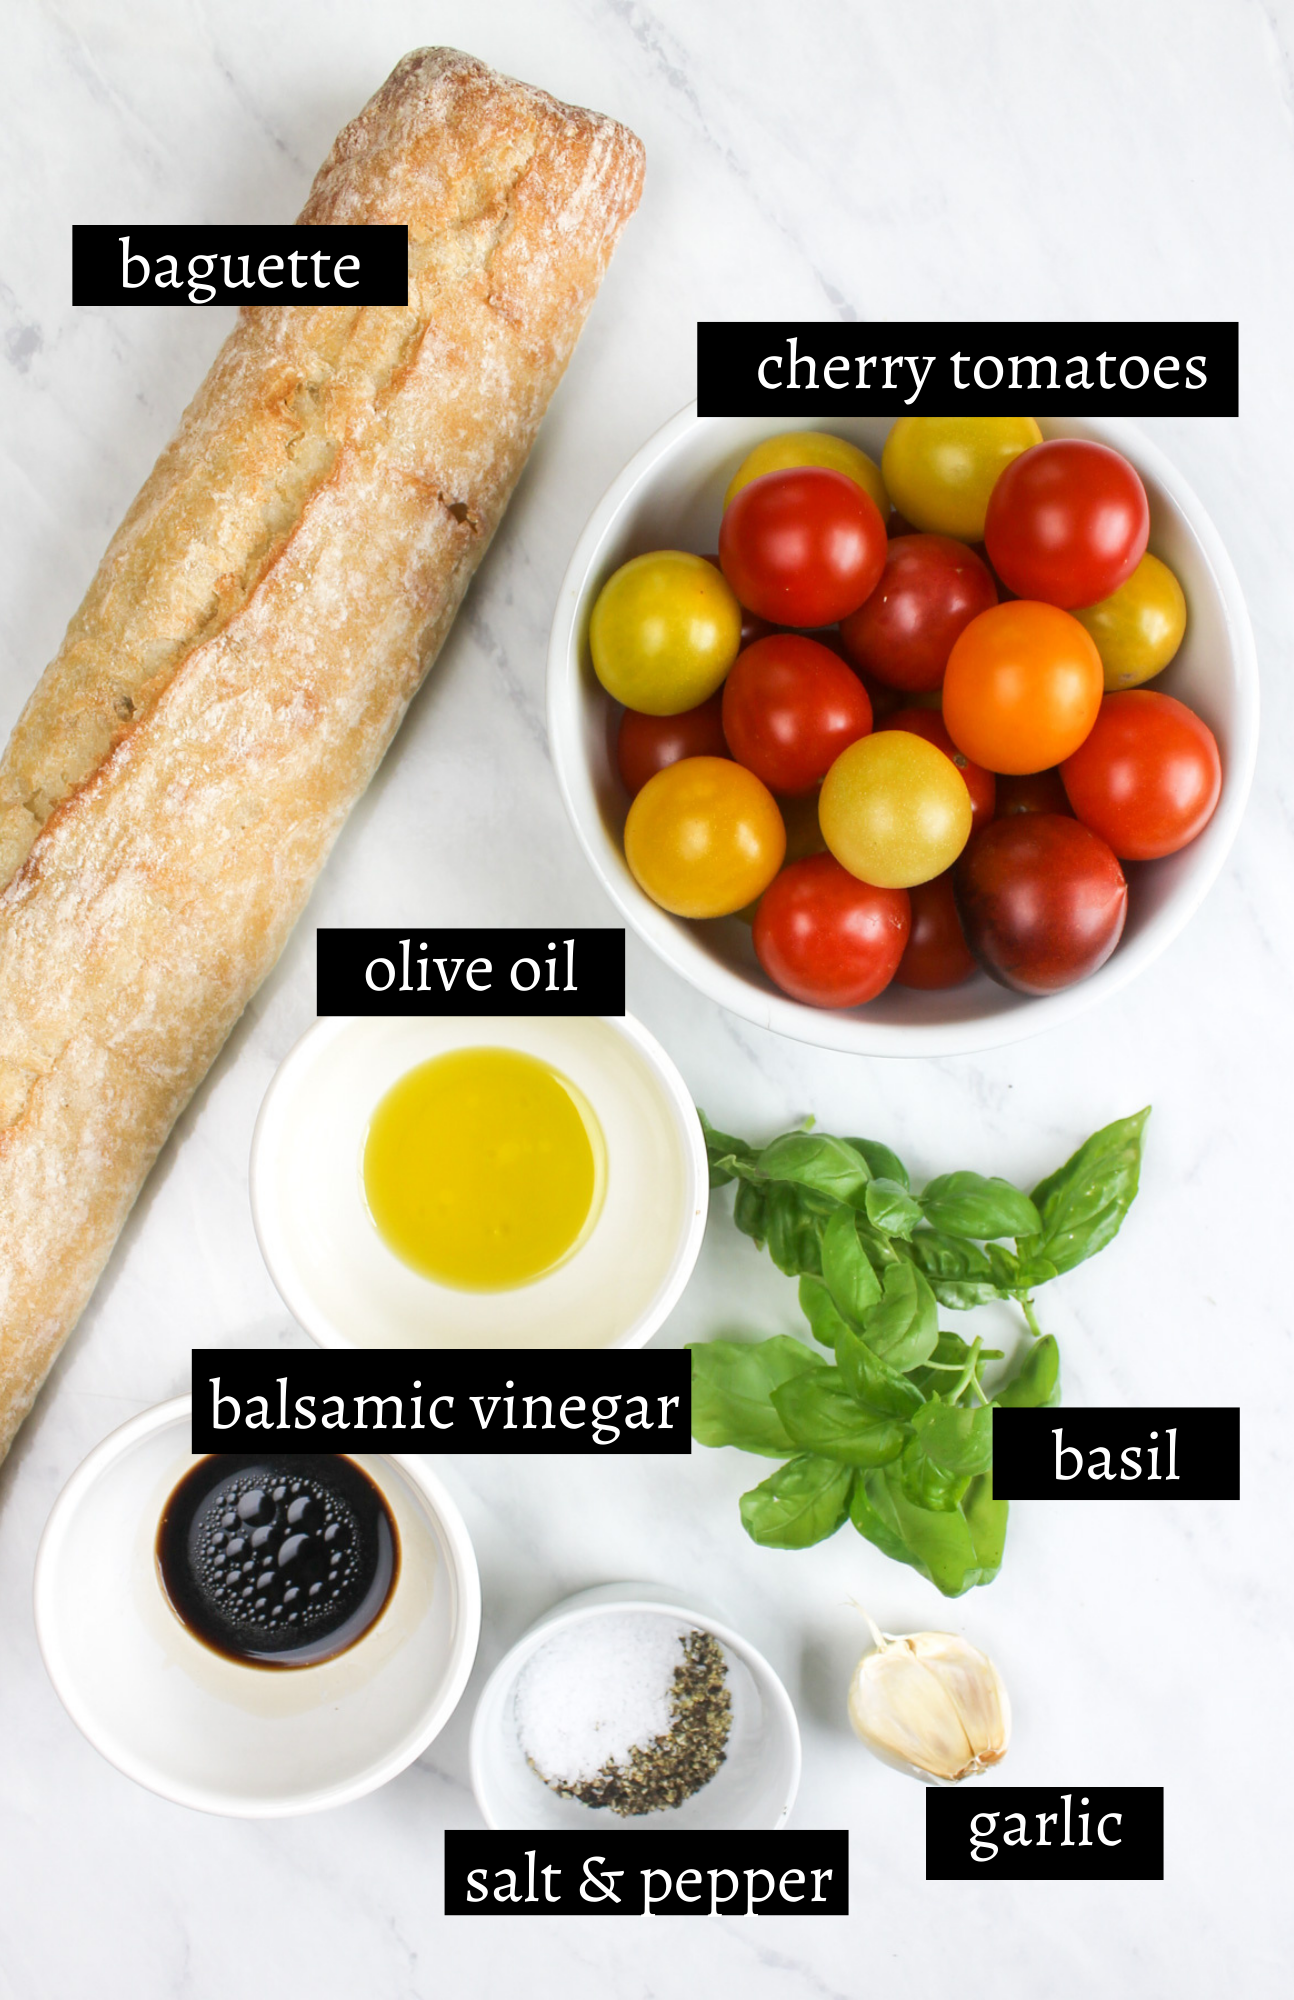 Labeled ingredients for bruschetta with cherry tomatoes, basil, garlic, baguette, oil and vinegar.